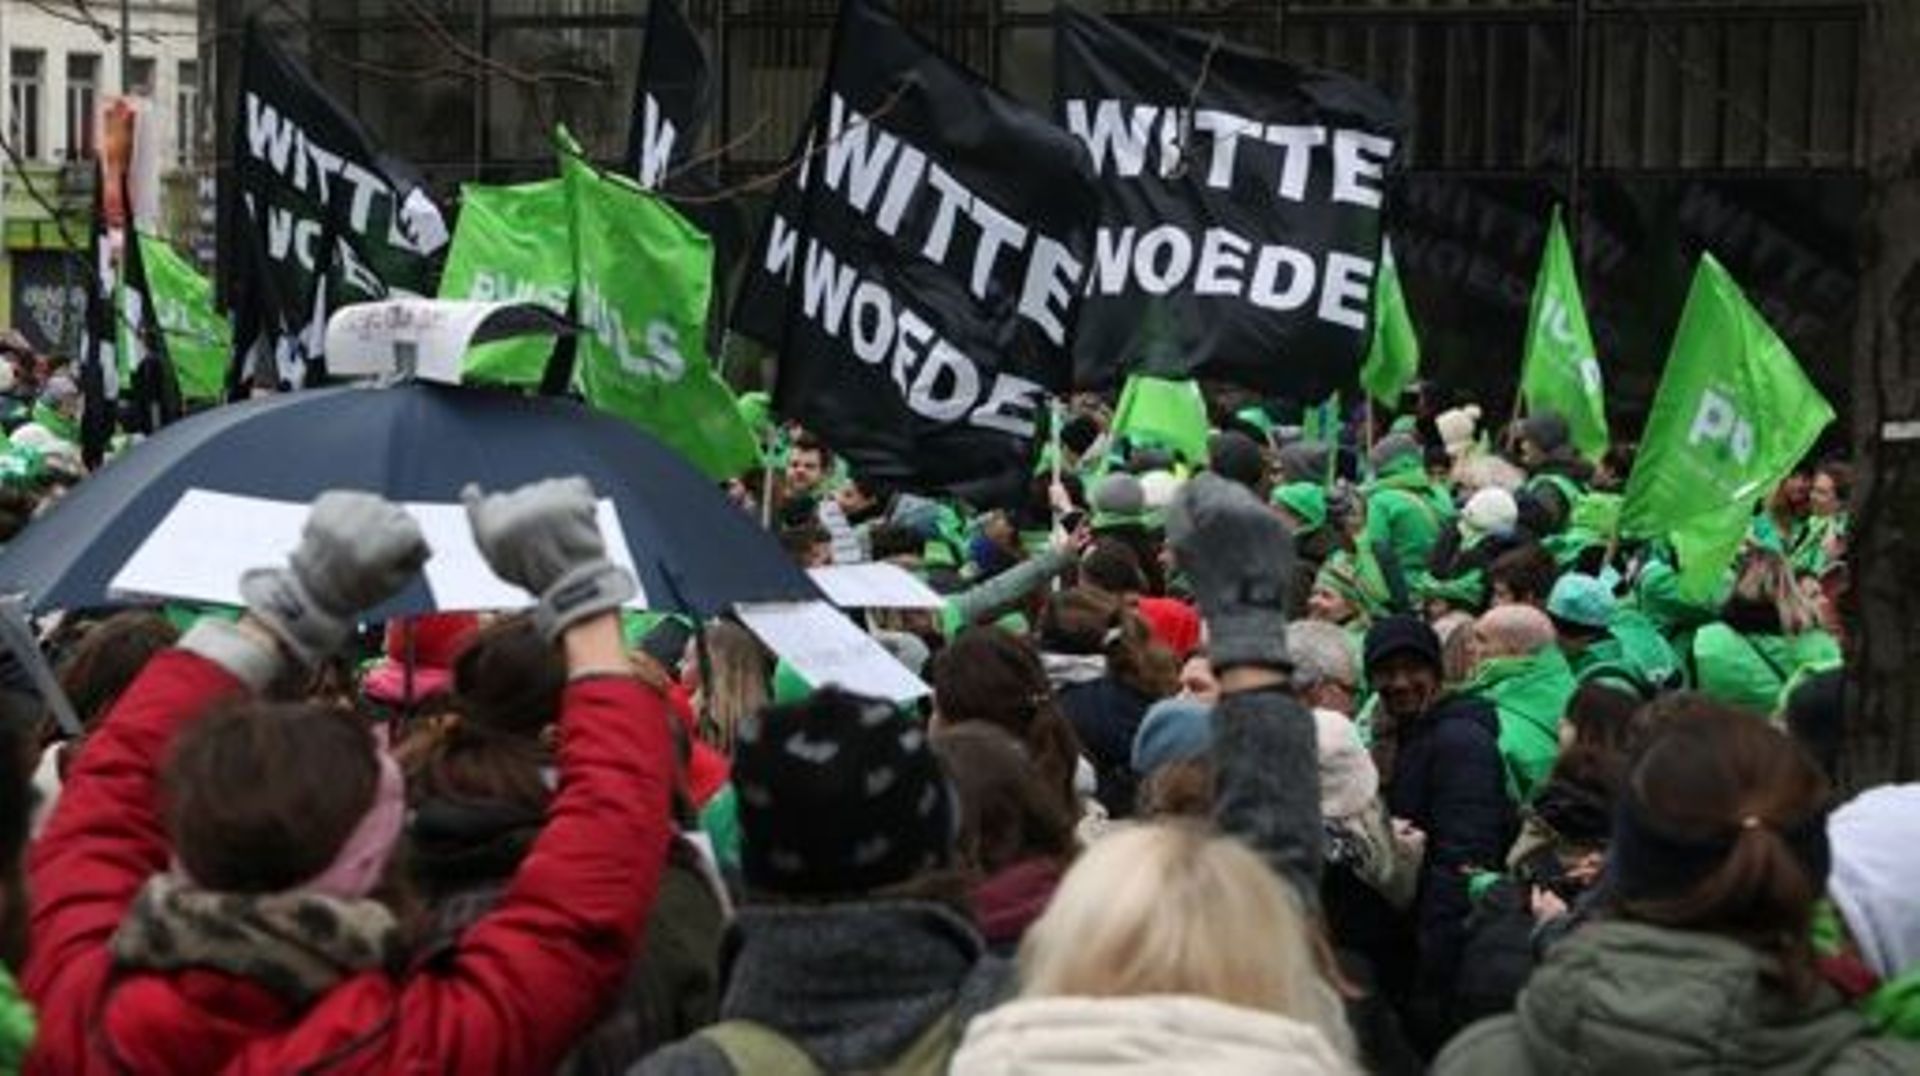 CSC - ACV union demonstrators in green pictured at a protest action of the trade unions of the non-profit sector in Brussels, Tuesday 31 January 2023. BELGA PHOTO NICOLAS MAETERLINCK